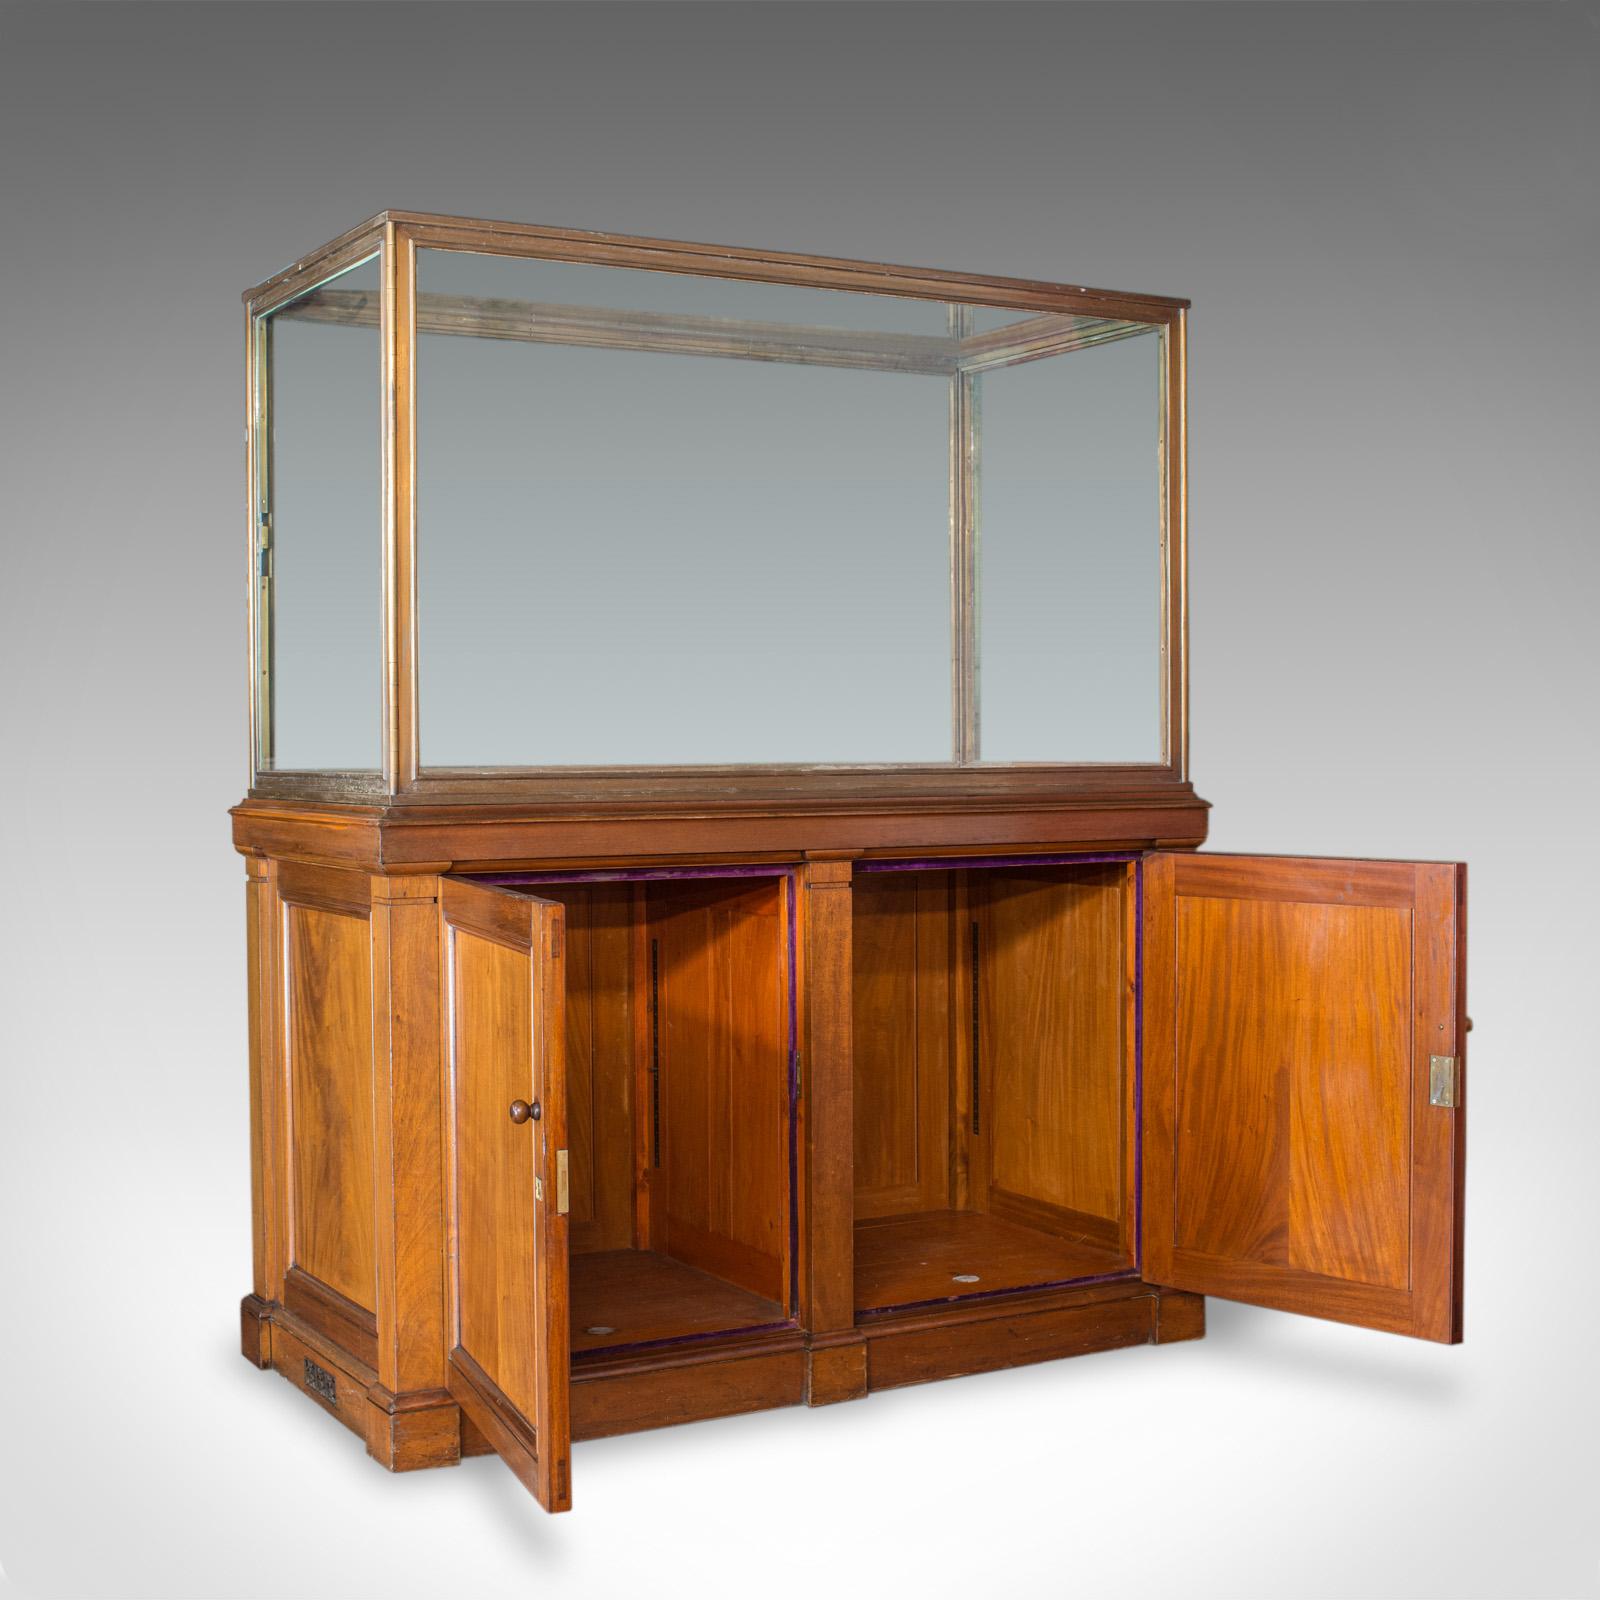 This is an antique showcase cabinet. An English, walnut and bronze display piece of museum quality and dating to the late 19th century, circa 1900.

Generous proportions and displays a desirable aged patina
Select cuts of walnut offer fine grain